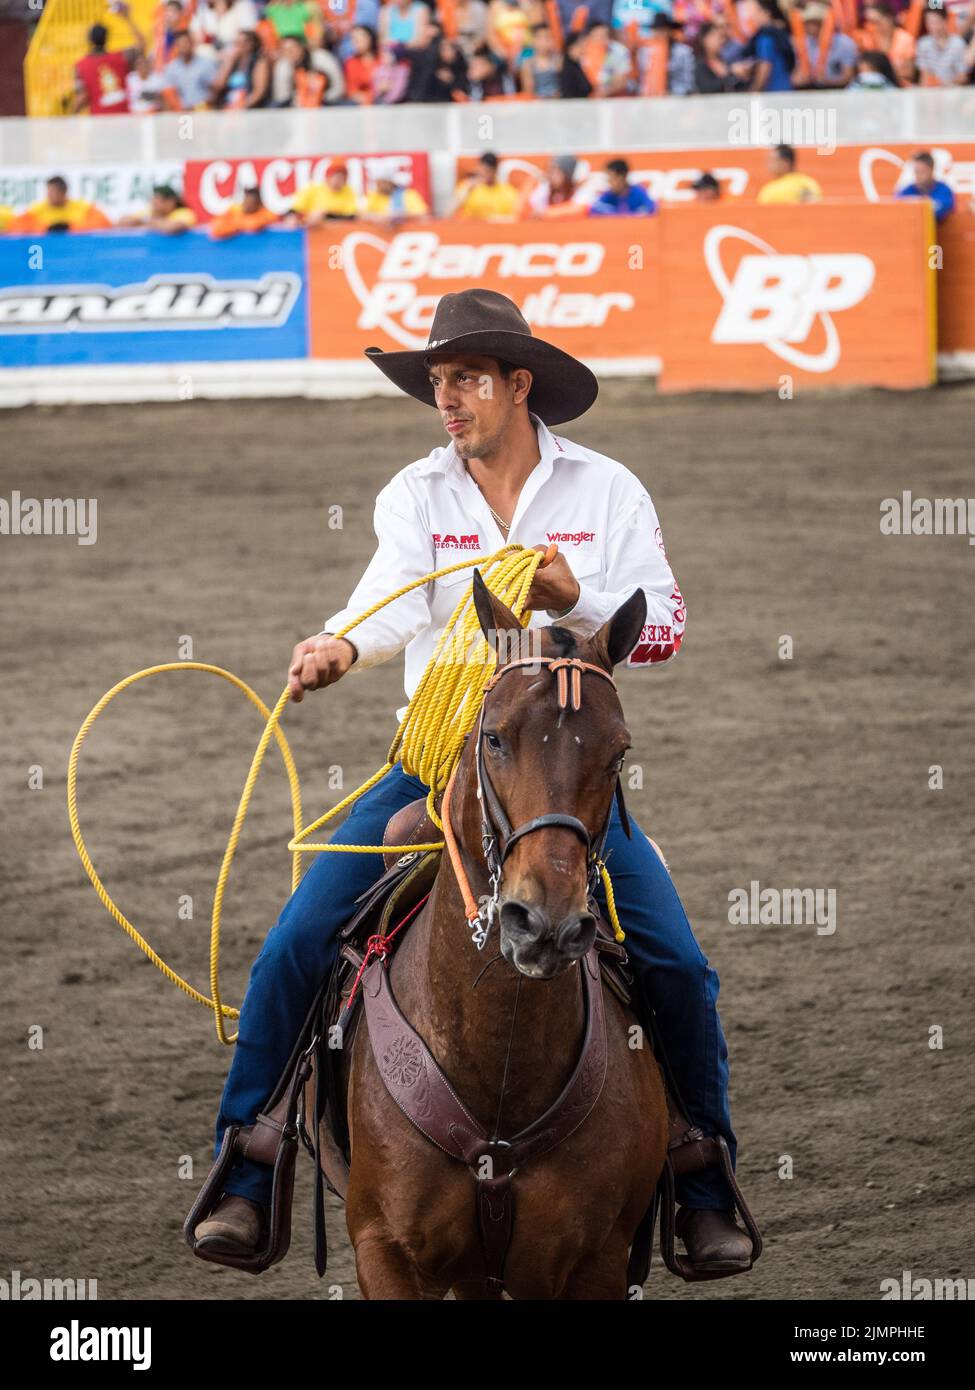 Cowboy on his horse at a rodeo in Zapote, Costa Rica. Stock Photo